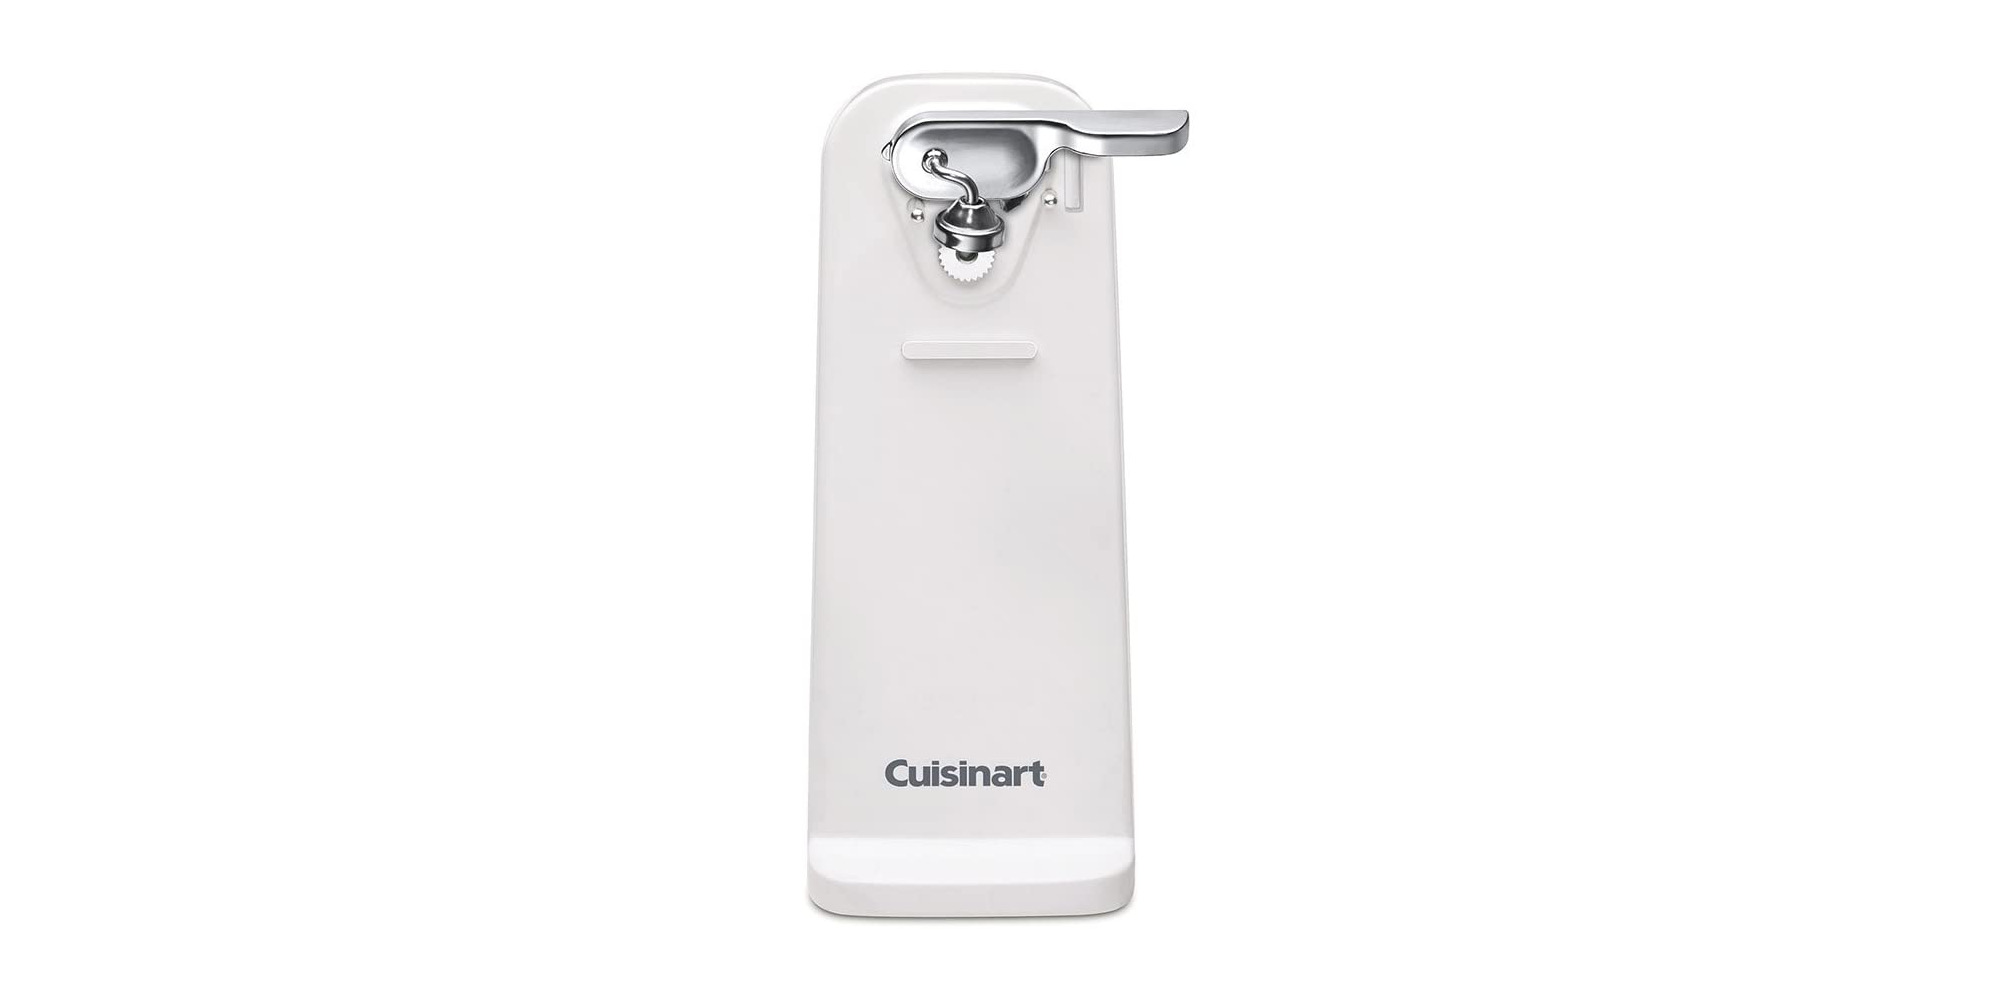 Stop doing it manually, Cuisinart's magnetic electric can opener now